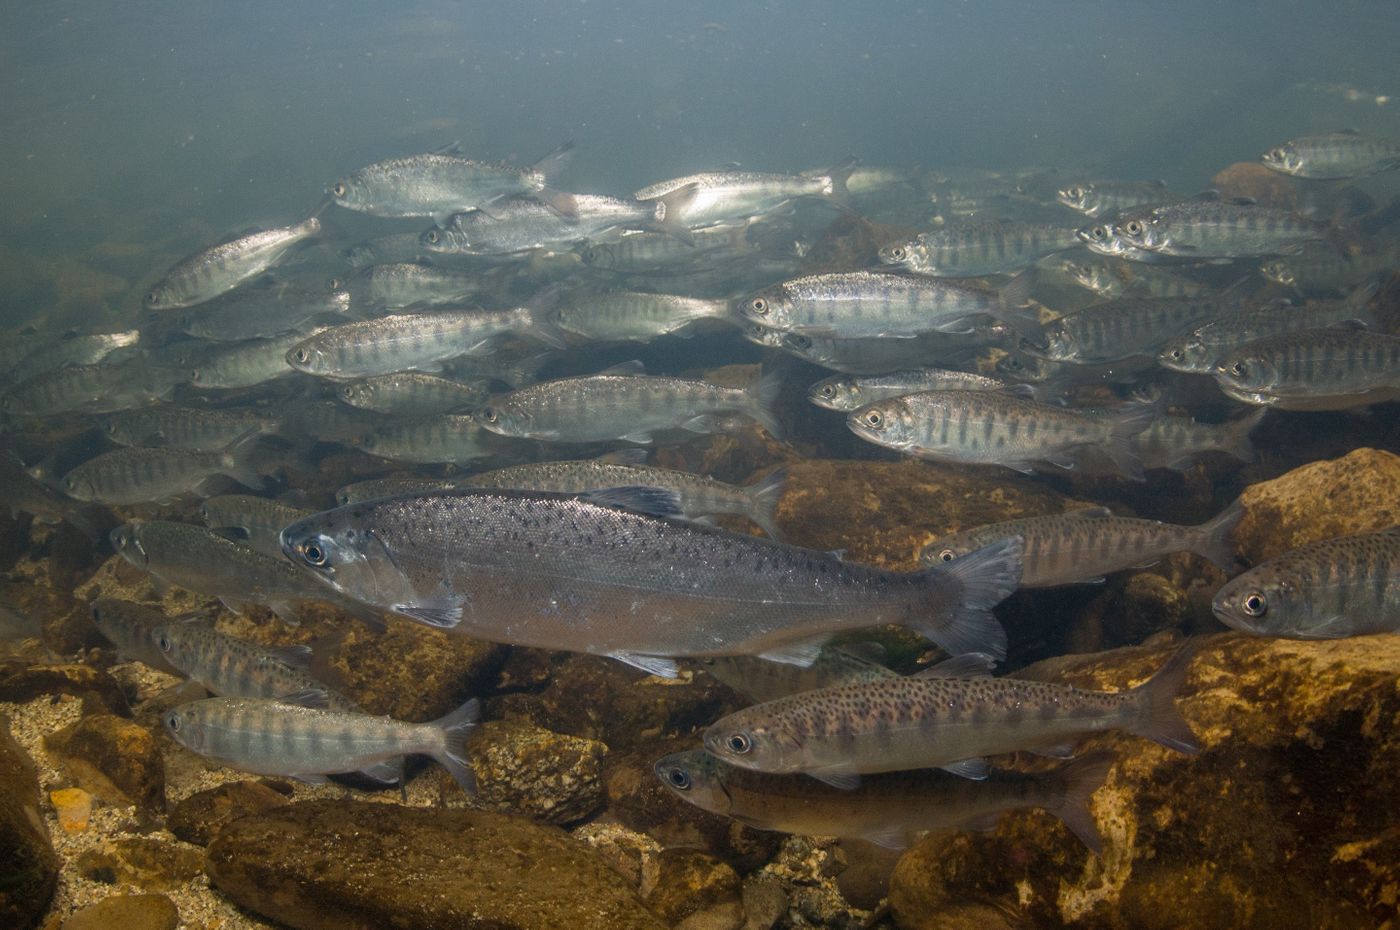 A school of juvenile coho salmon, just like those used in the study.